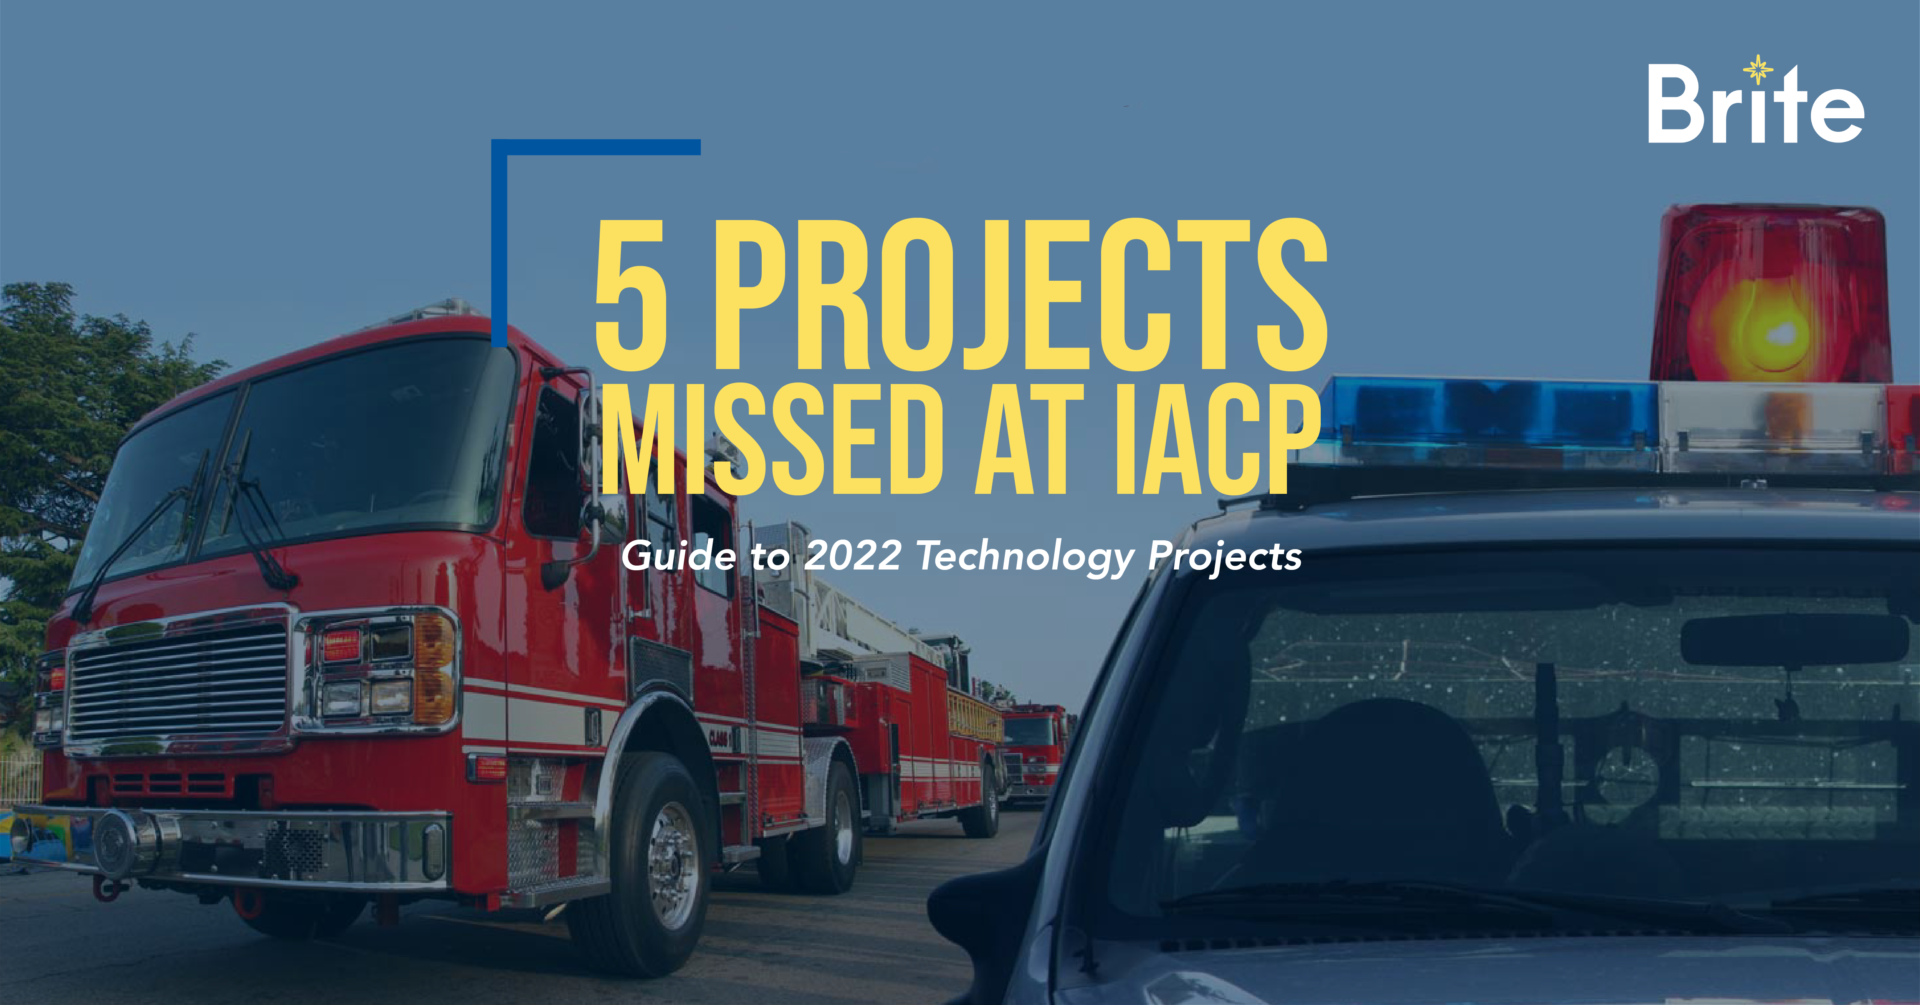 5 Projects Missed at IACP Guide to 2022 Technology Projects Brite